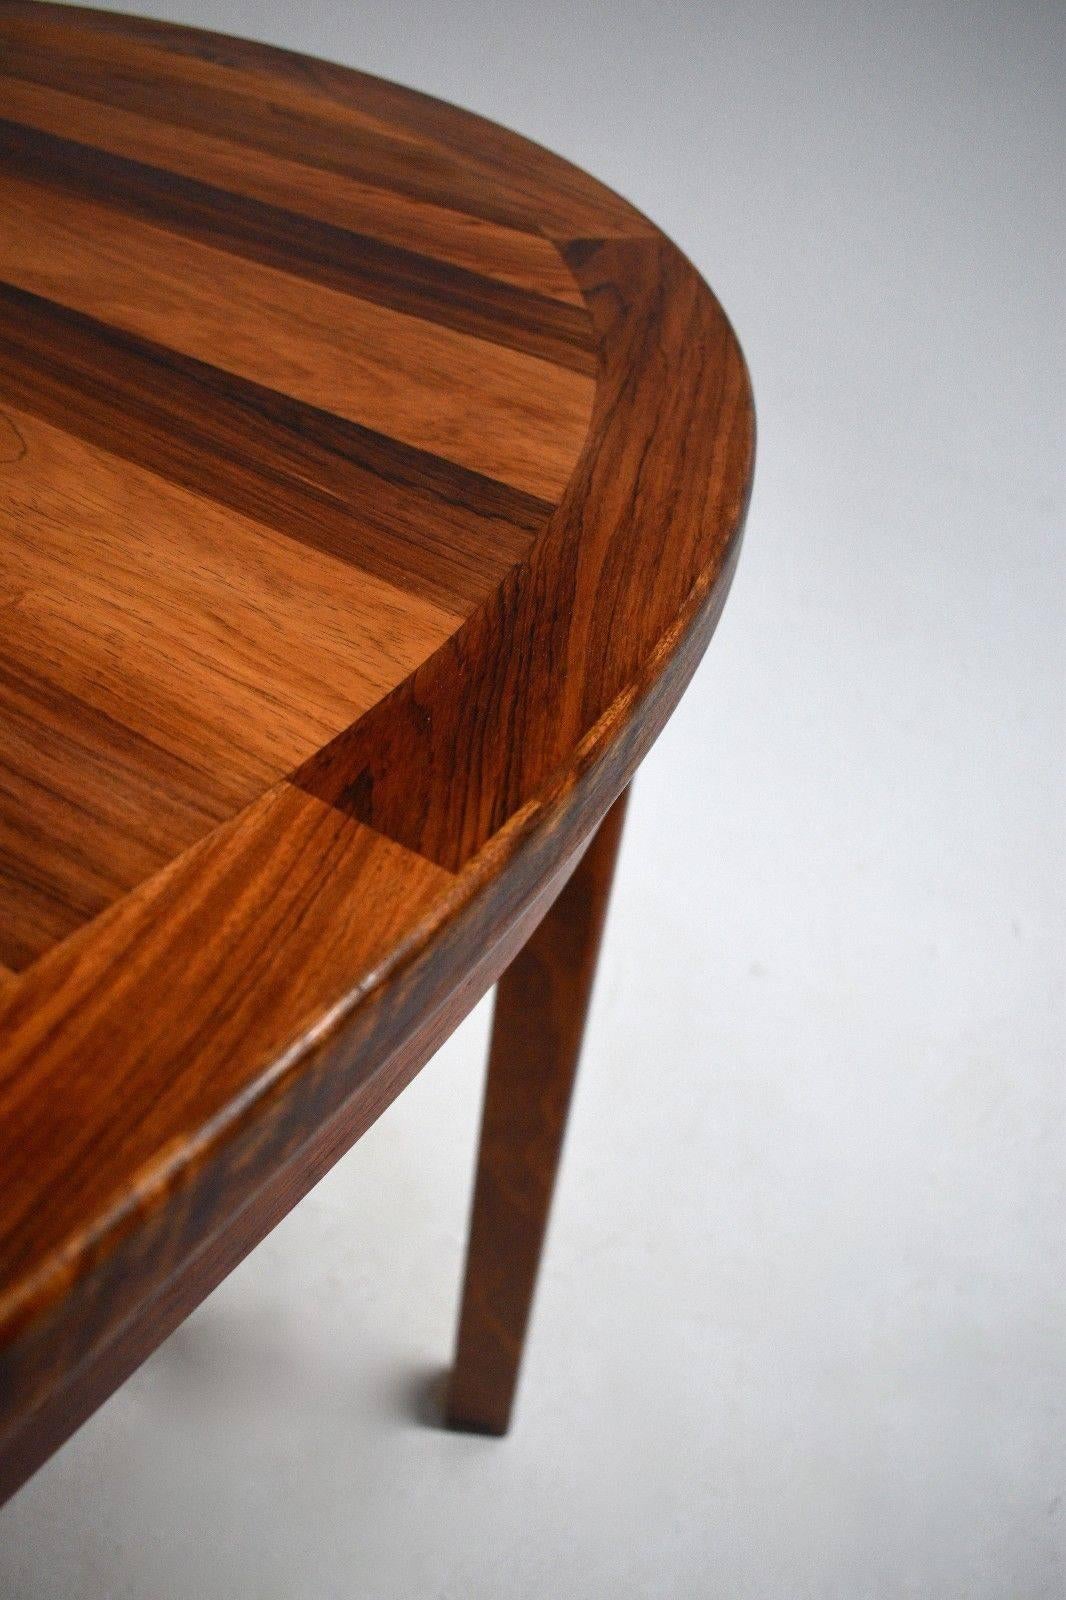 20th Century Swedish Nils Jonsson Rosewood Oval Dining Table Midcentury, 1960s For Sale